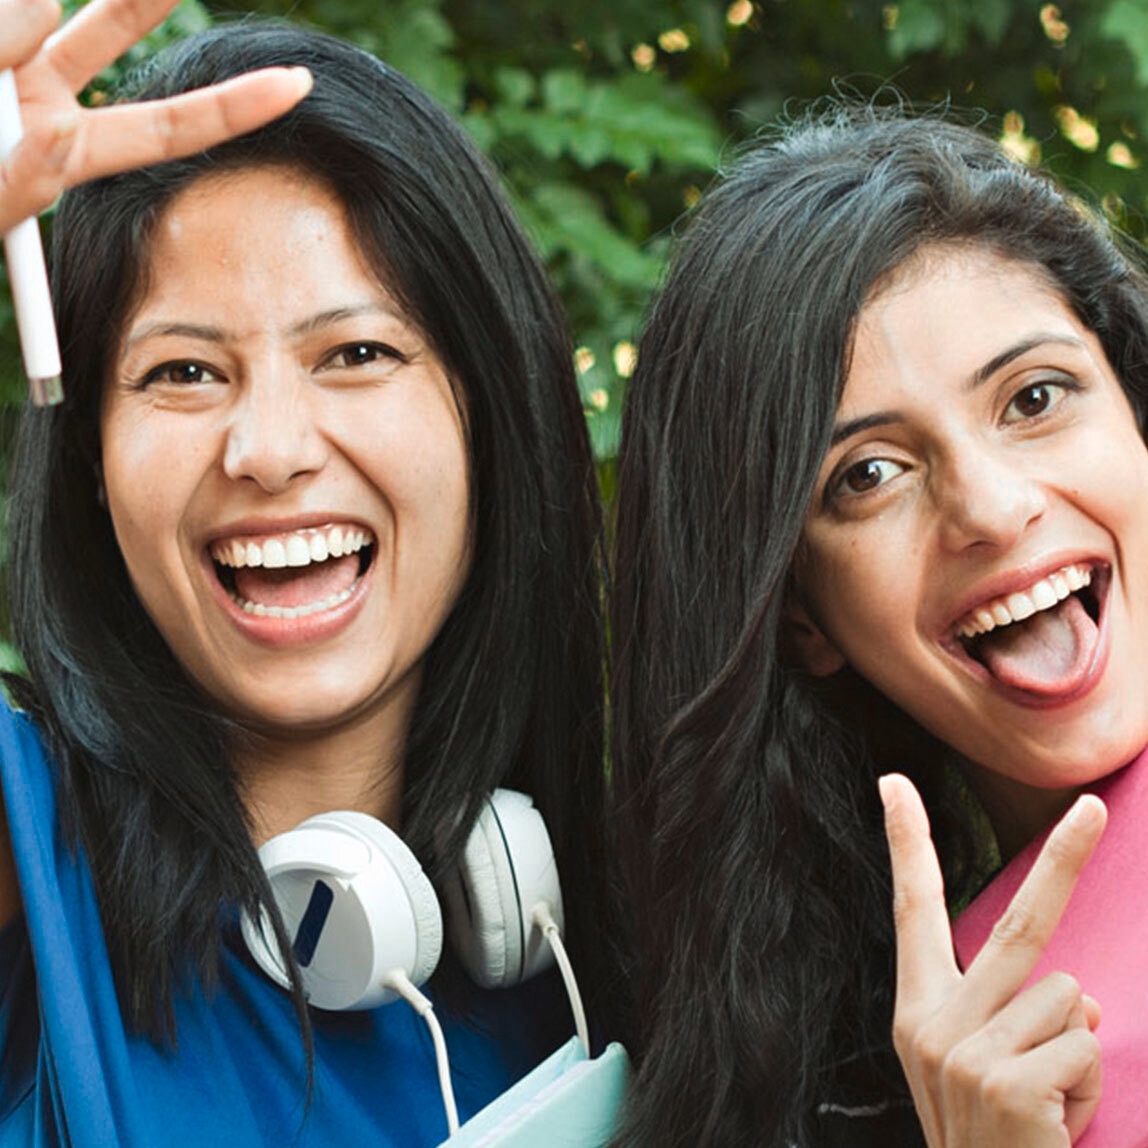 Two women laughing and making two-fingered peace gesture at the camera. One of the girls is wearing large headphones and holding a school notebook.